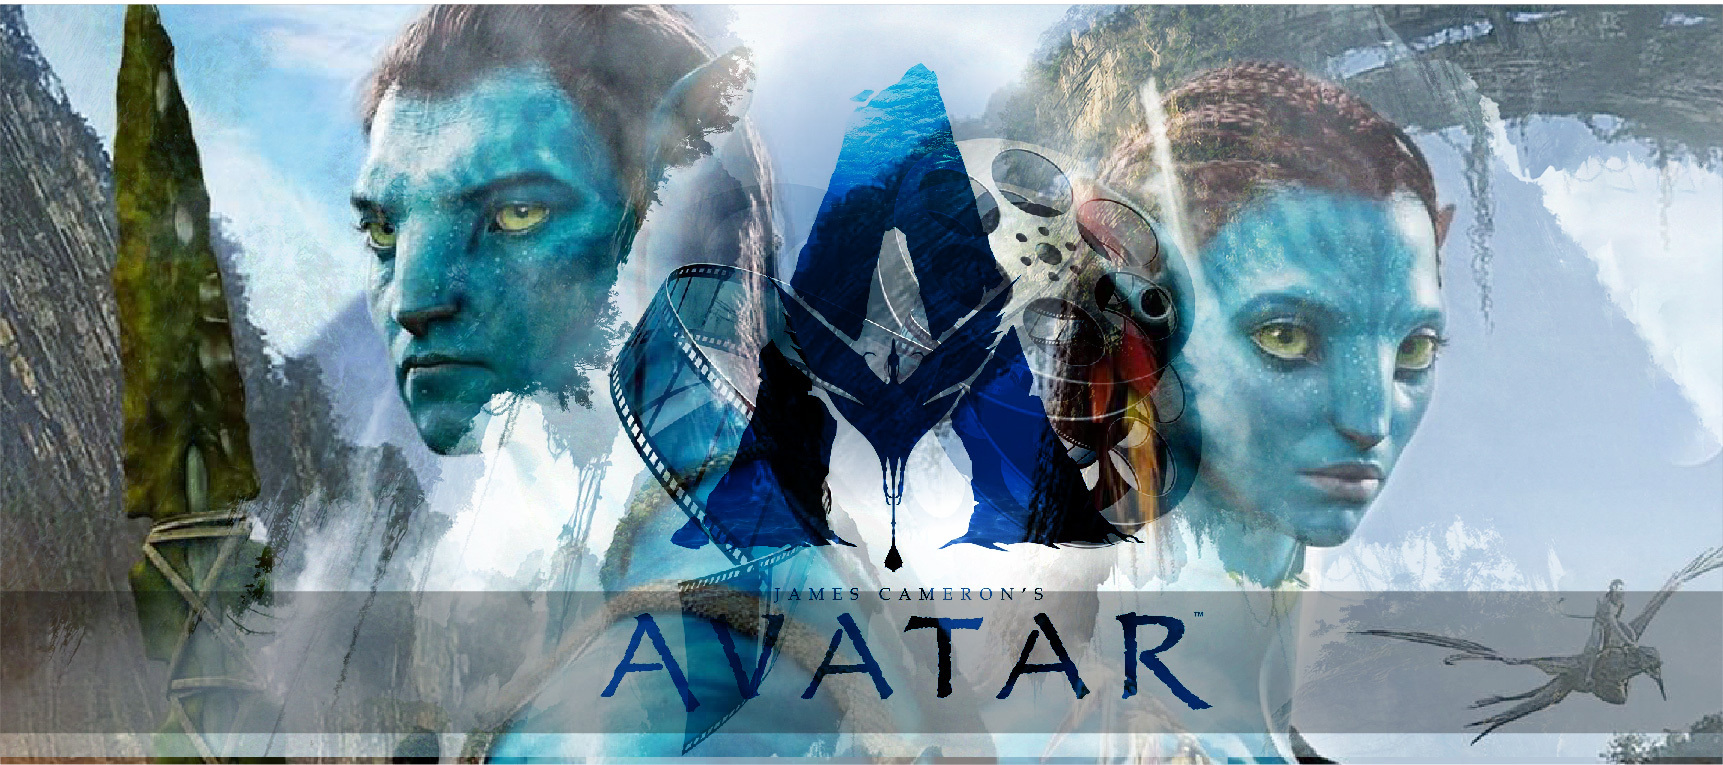 Avatar: The Way of Water Box Office Worldwide Collection. - GFI NEWS